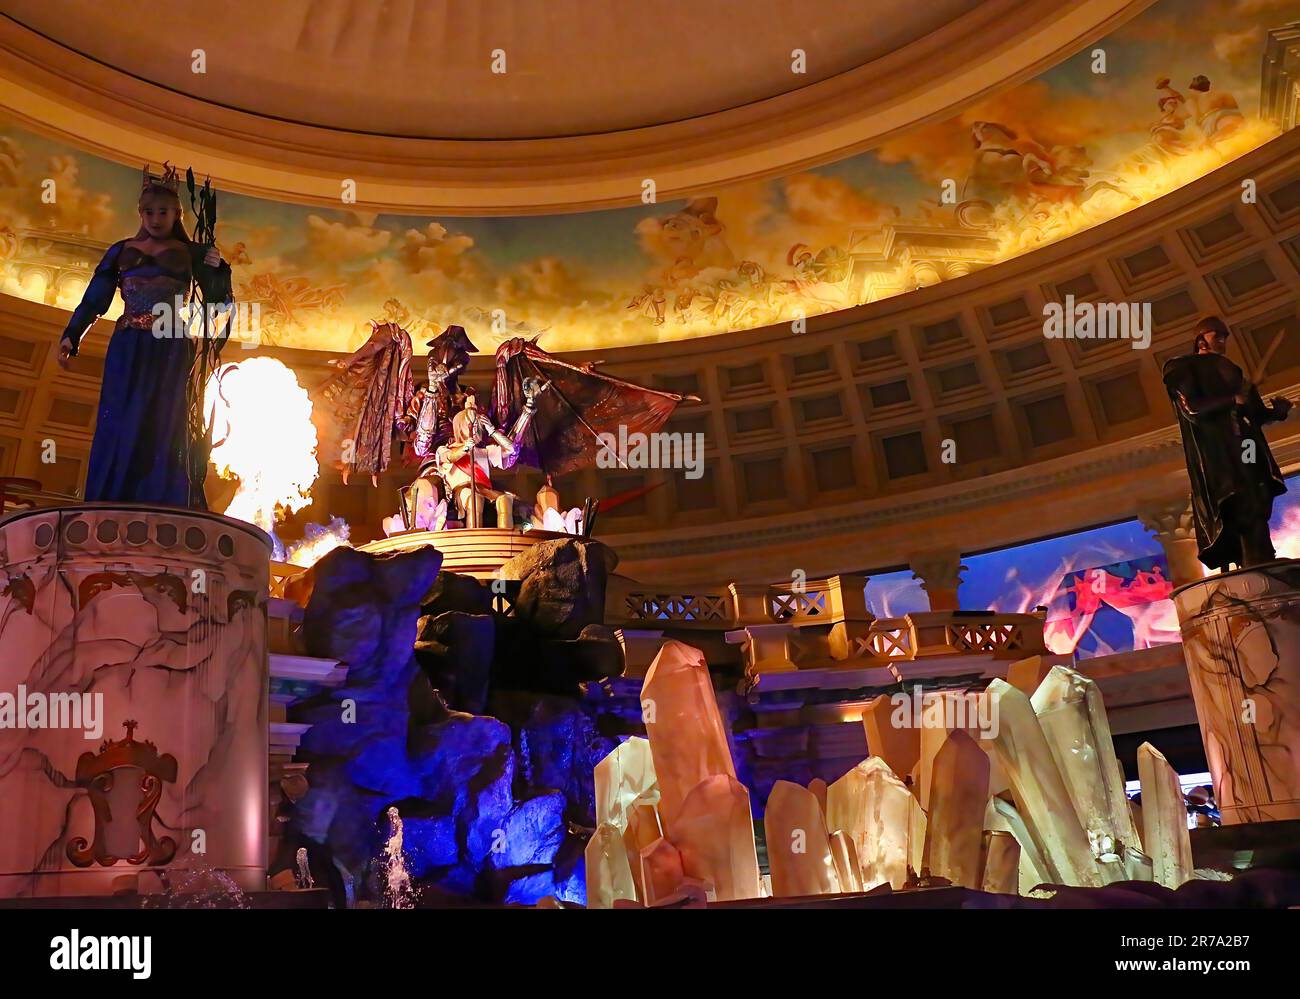 How to get to Fall of Atlantis at Caesars Palace Forum Shops in